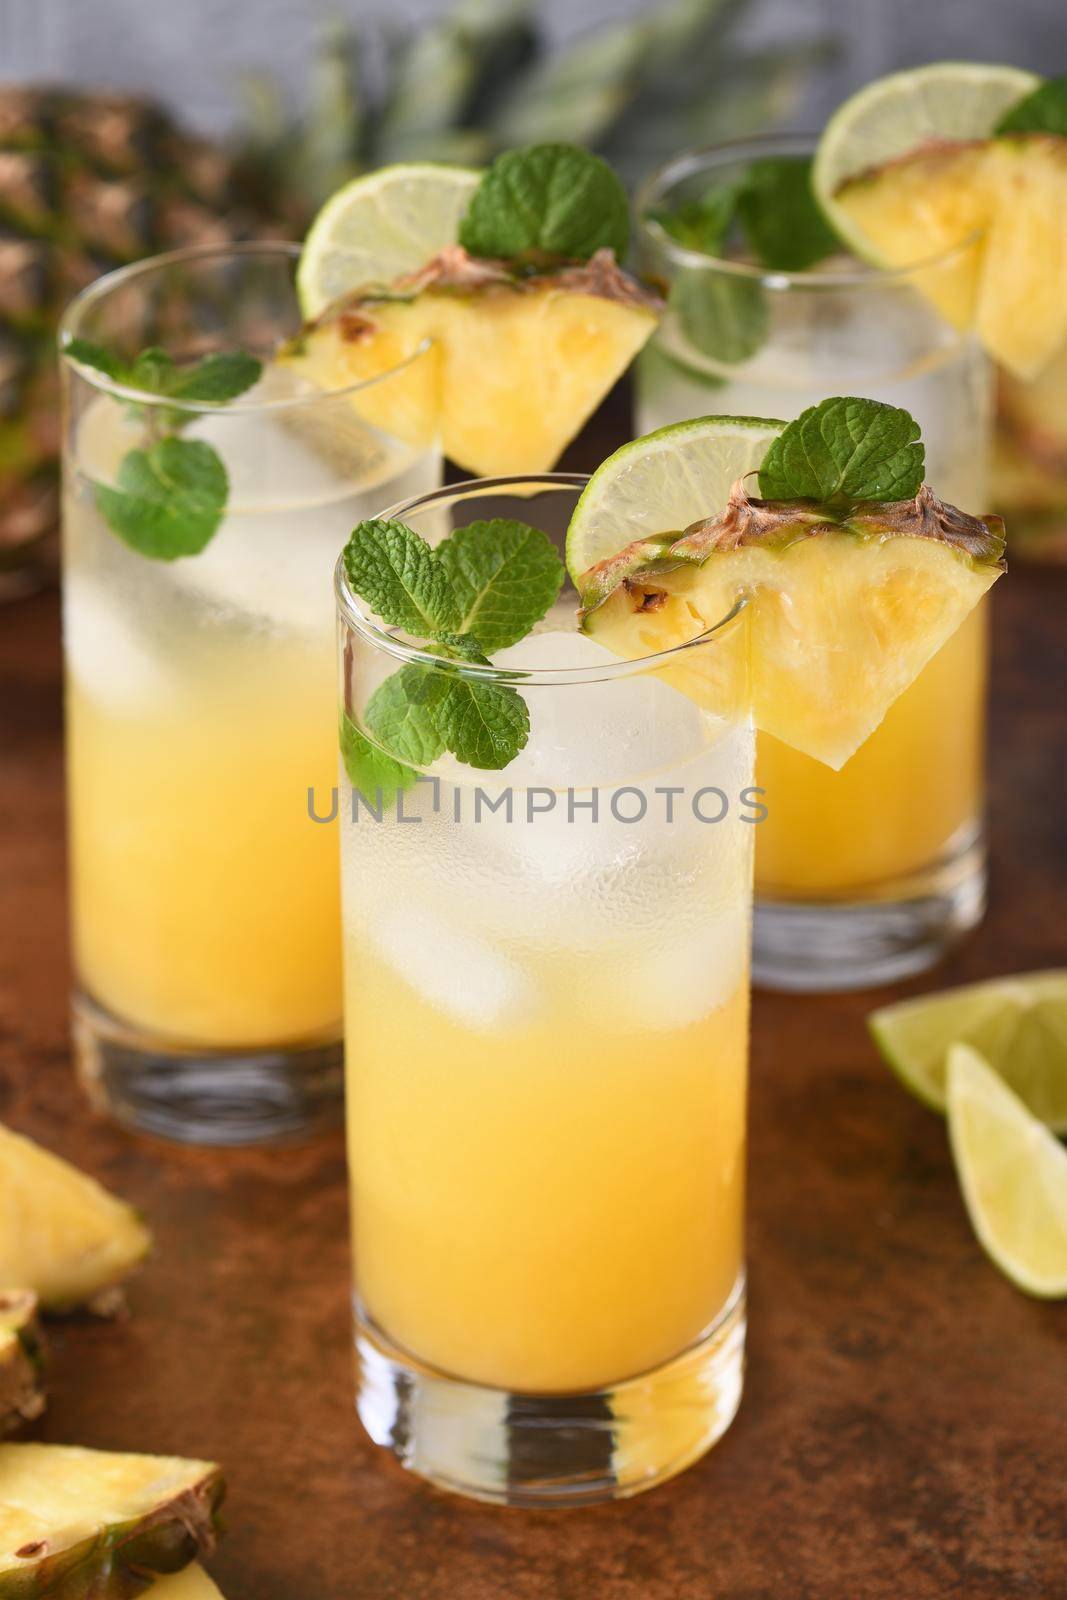 Pineapple mojito, the perfect summer cocktail with tropical flavors and rum.